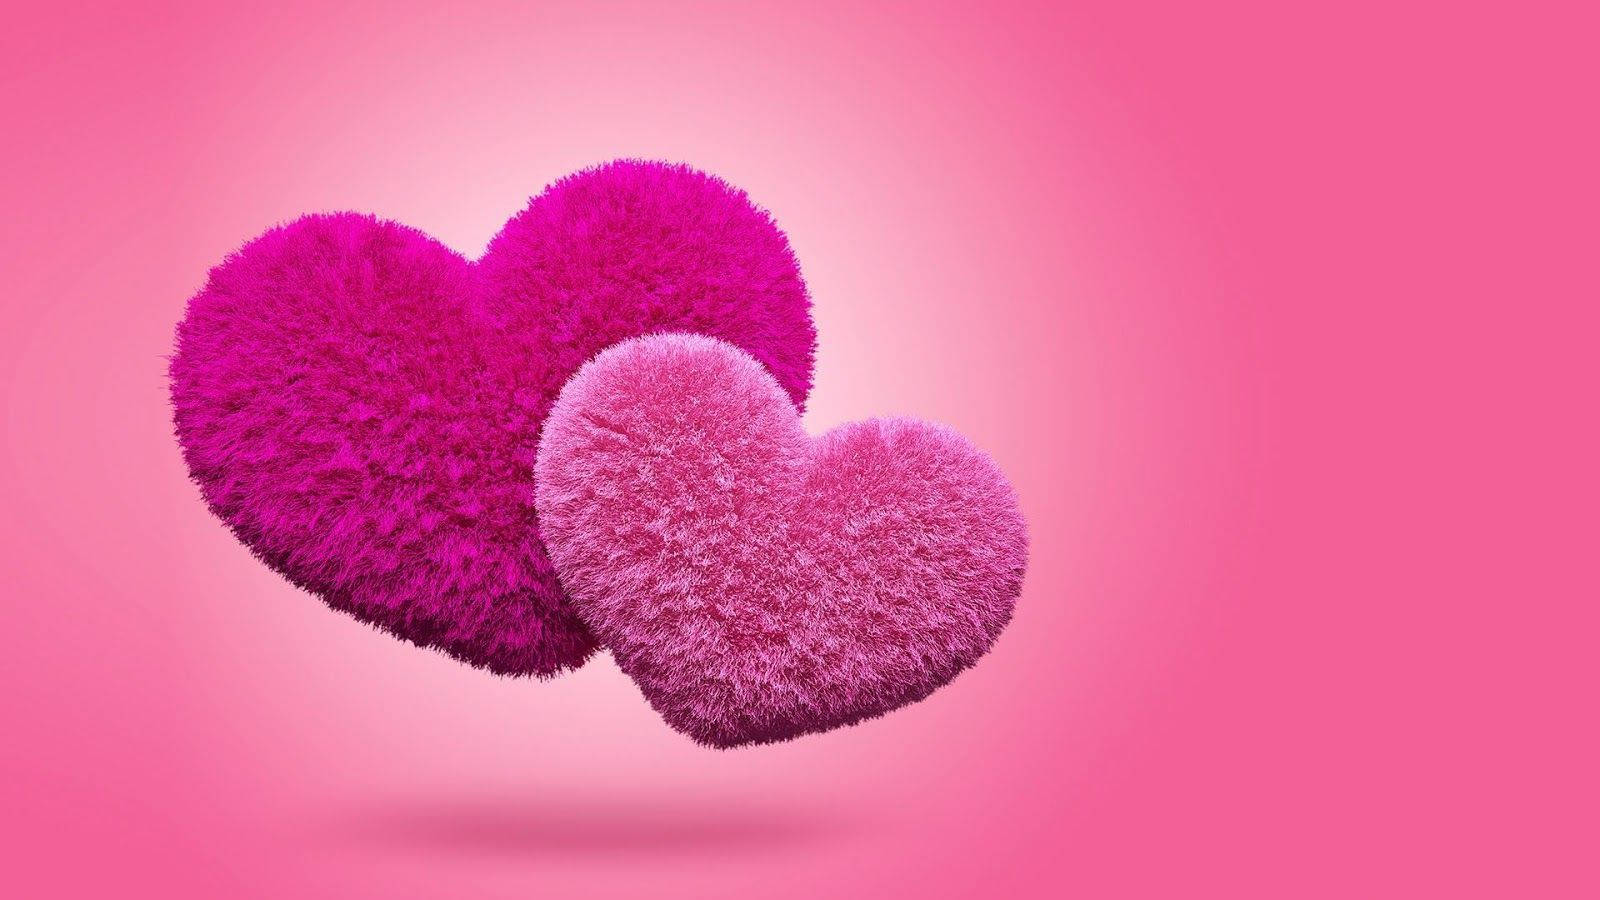 Cute Heart With Fur Pink Aesthetic Background